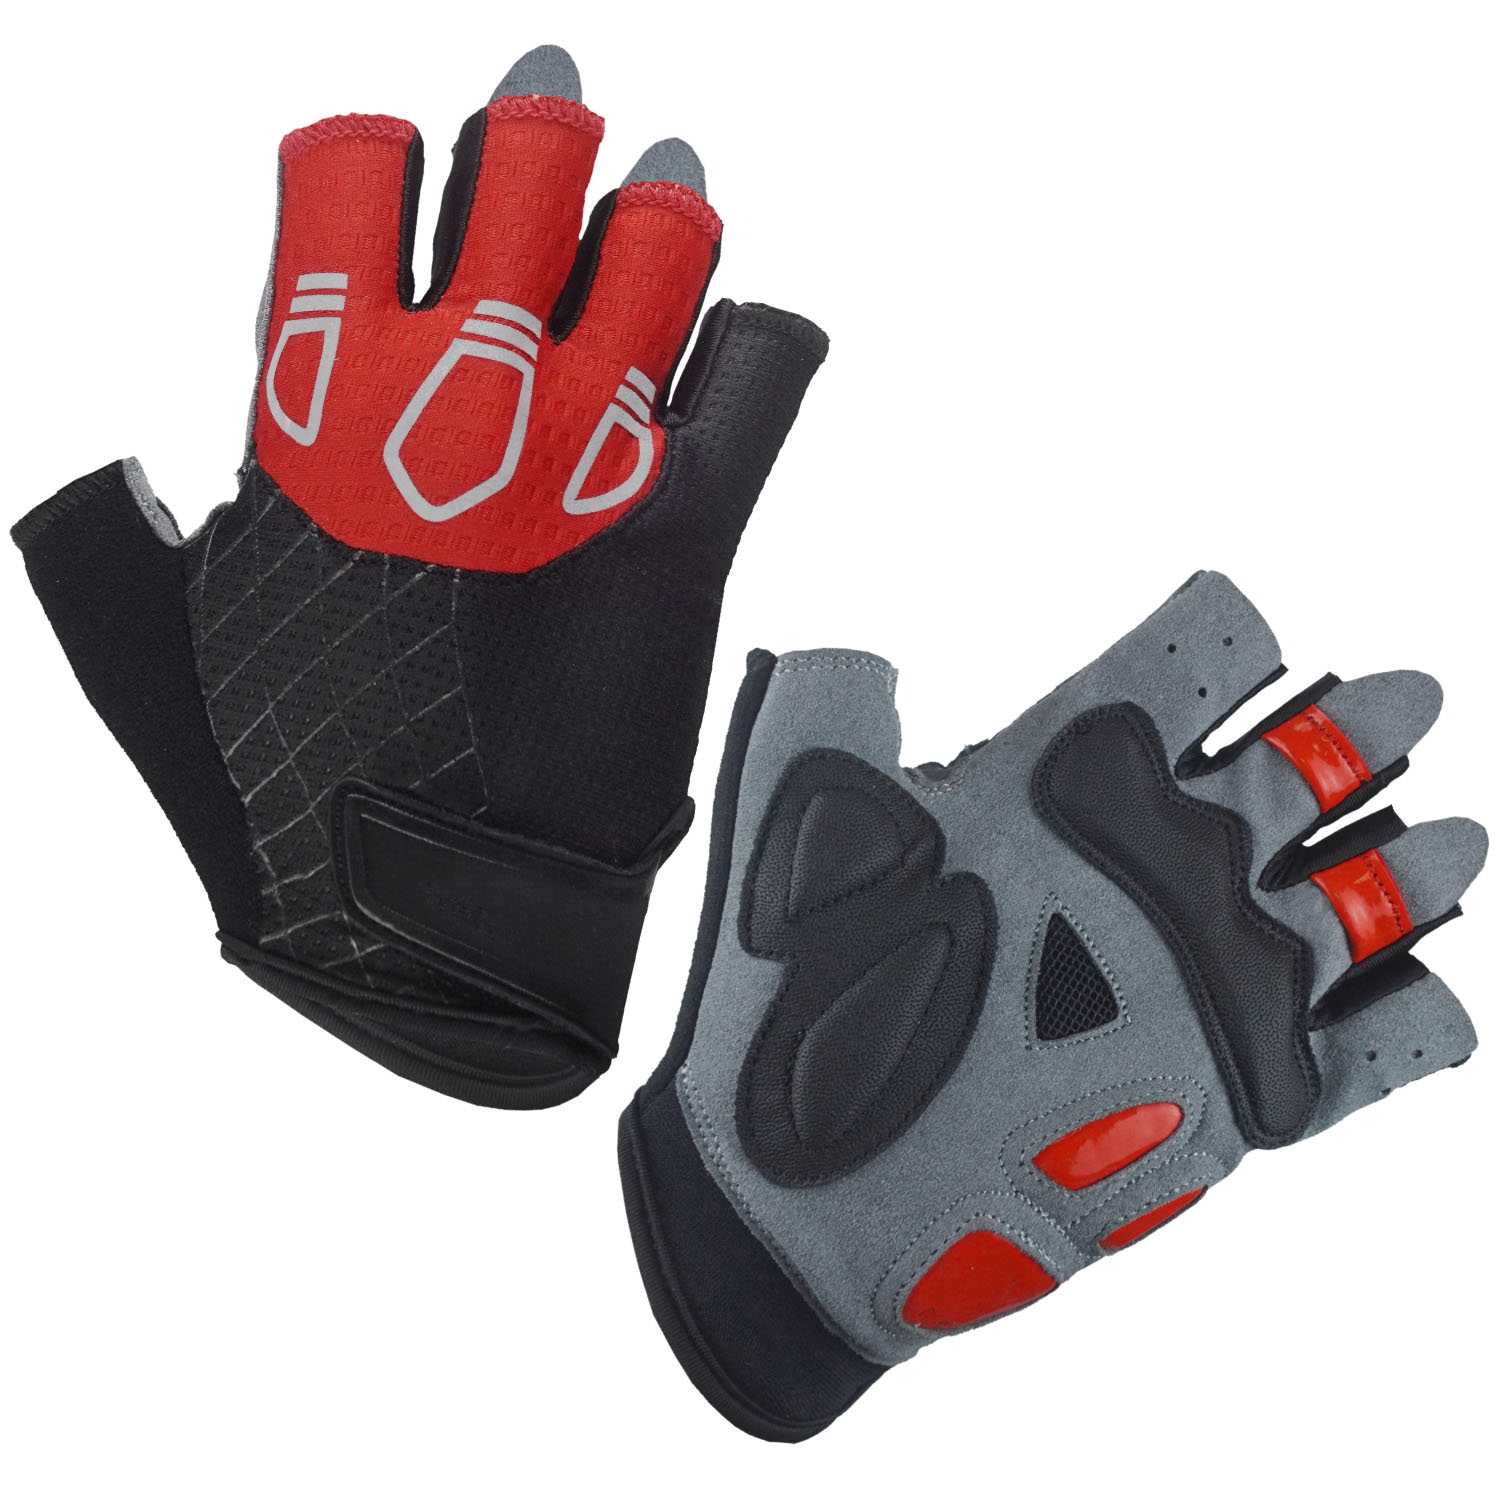 microfiber fabric palm with gel padding half fingers cycling gloves